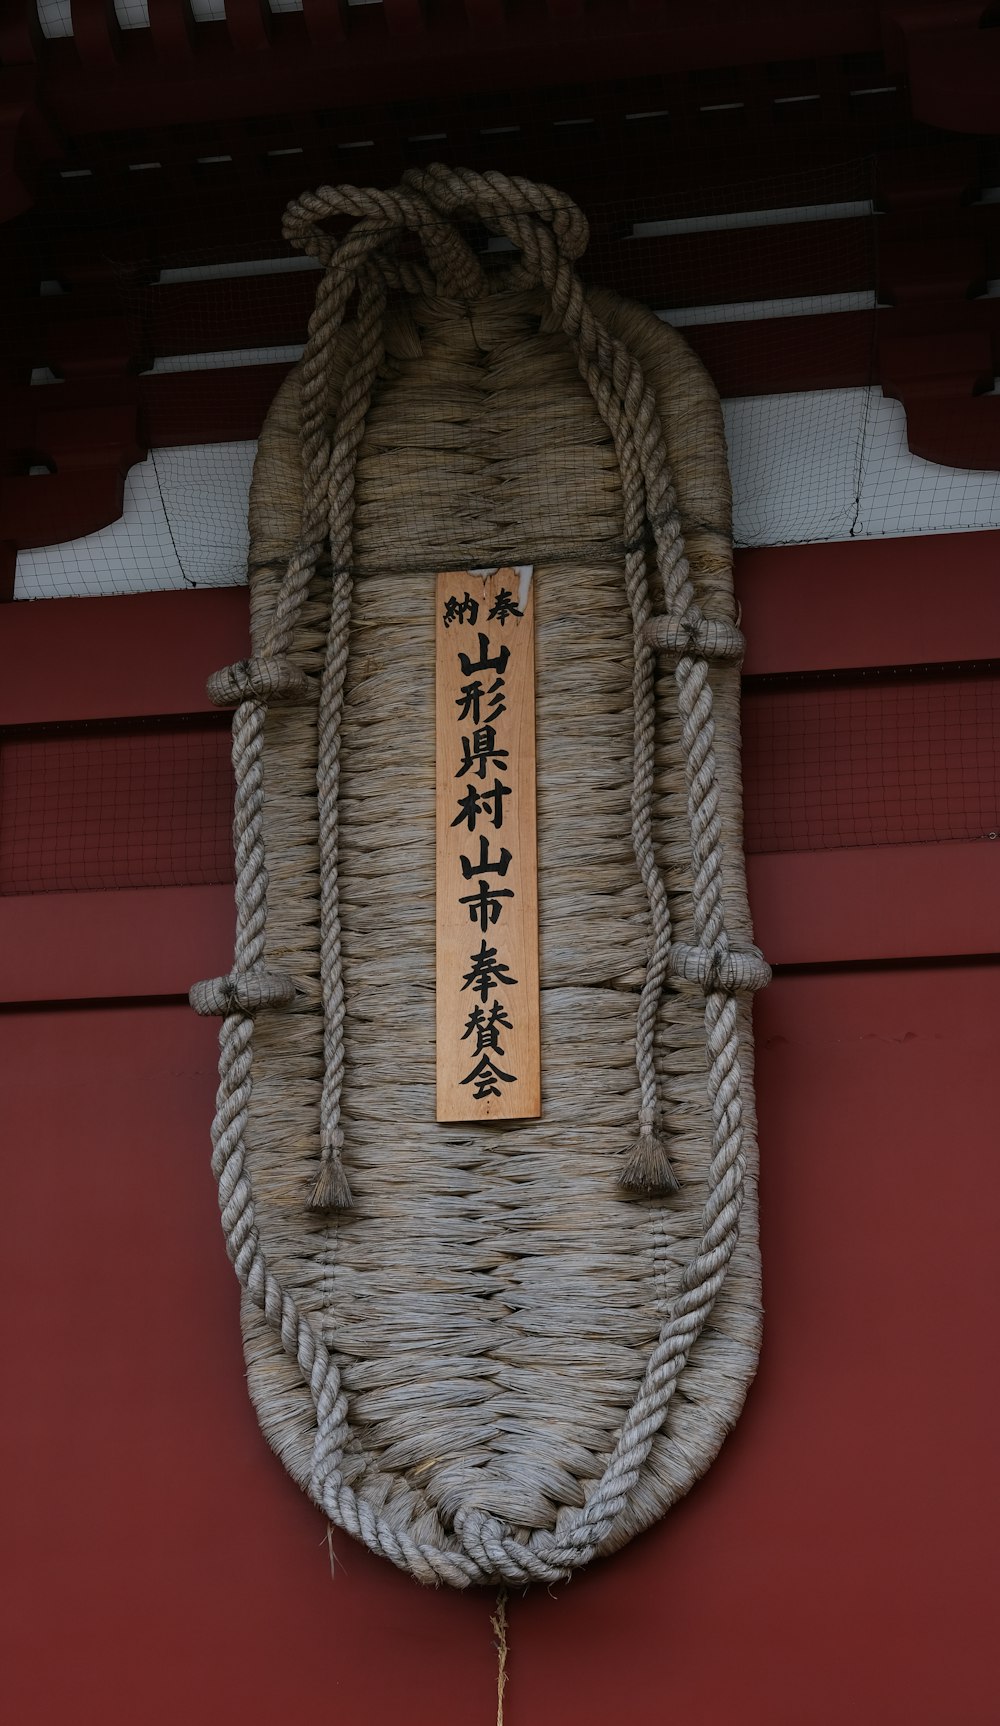 a chinese sign hanging on the side of a building